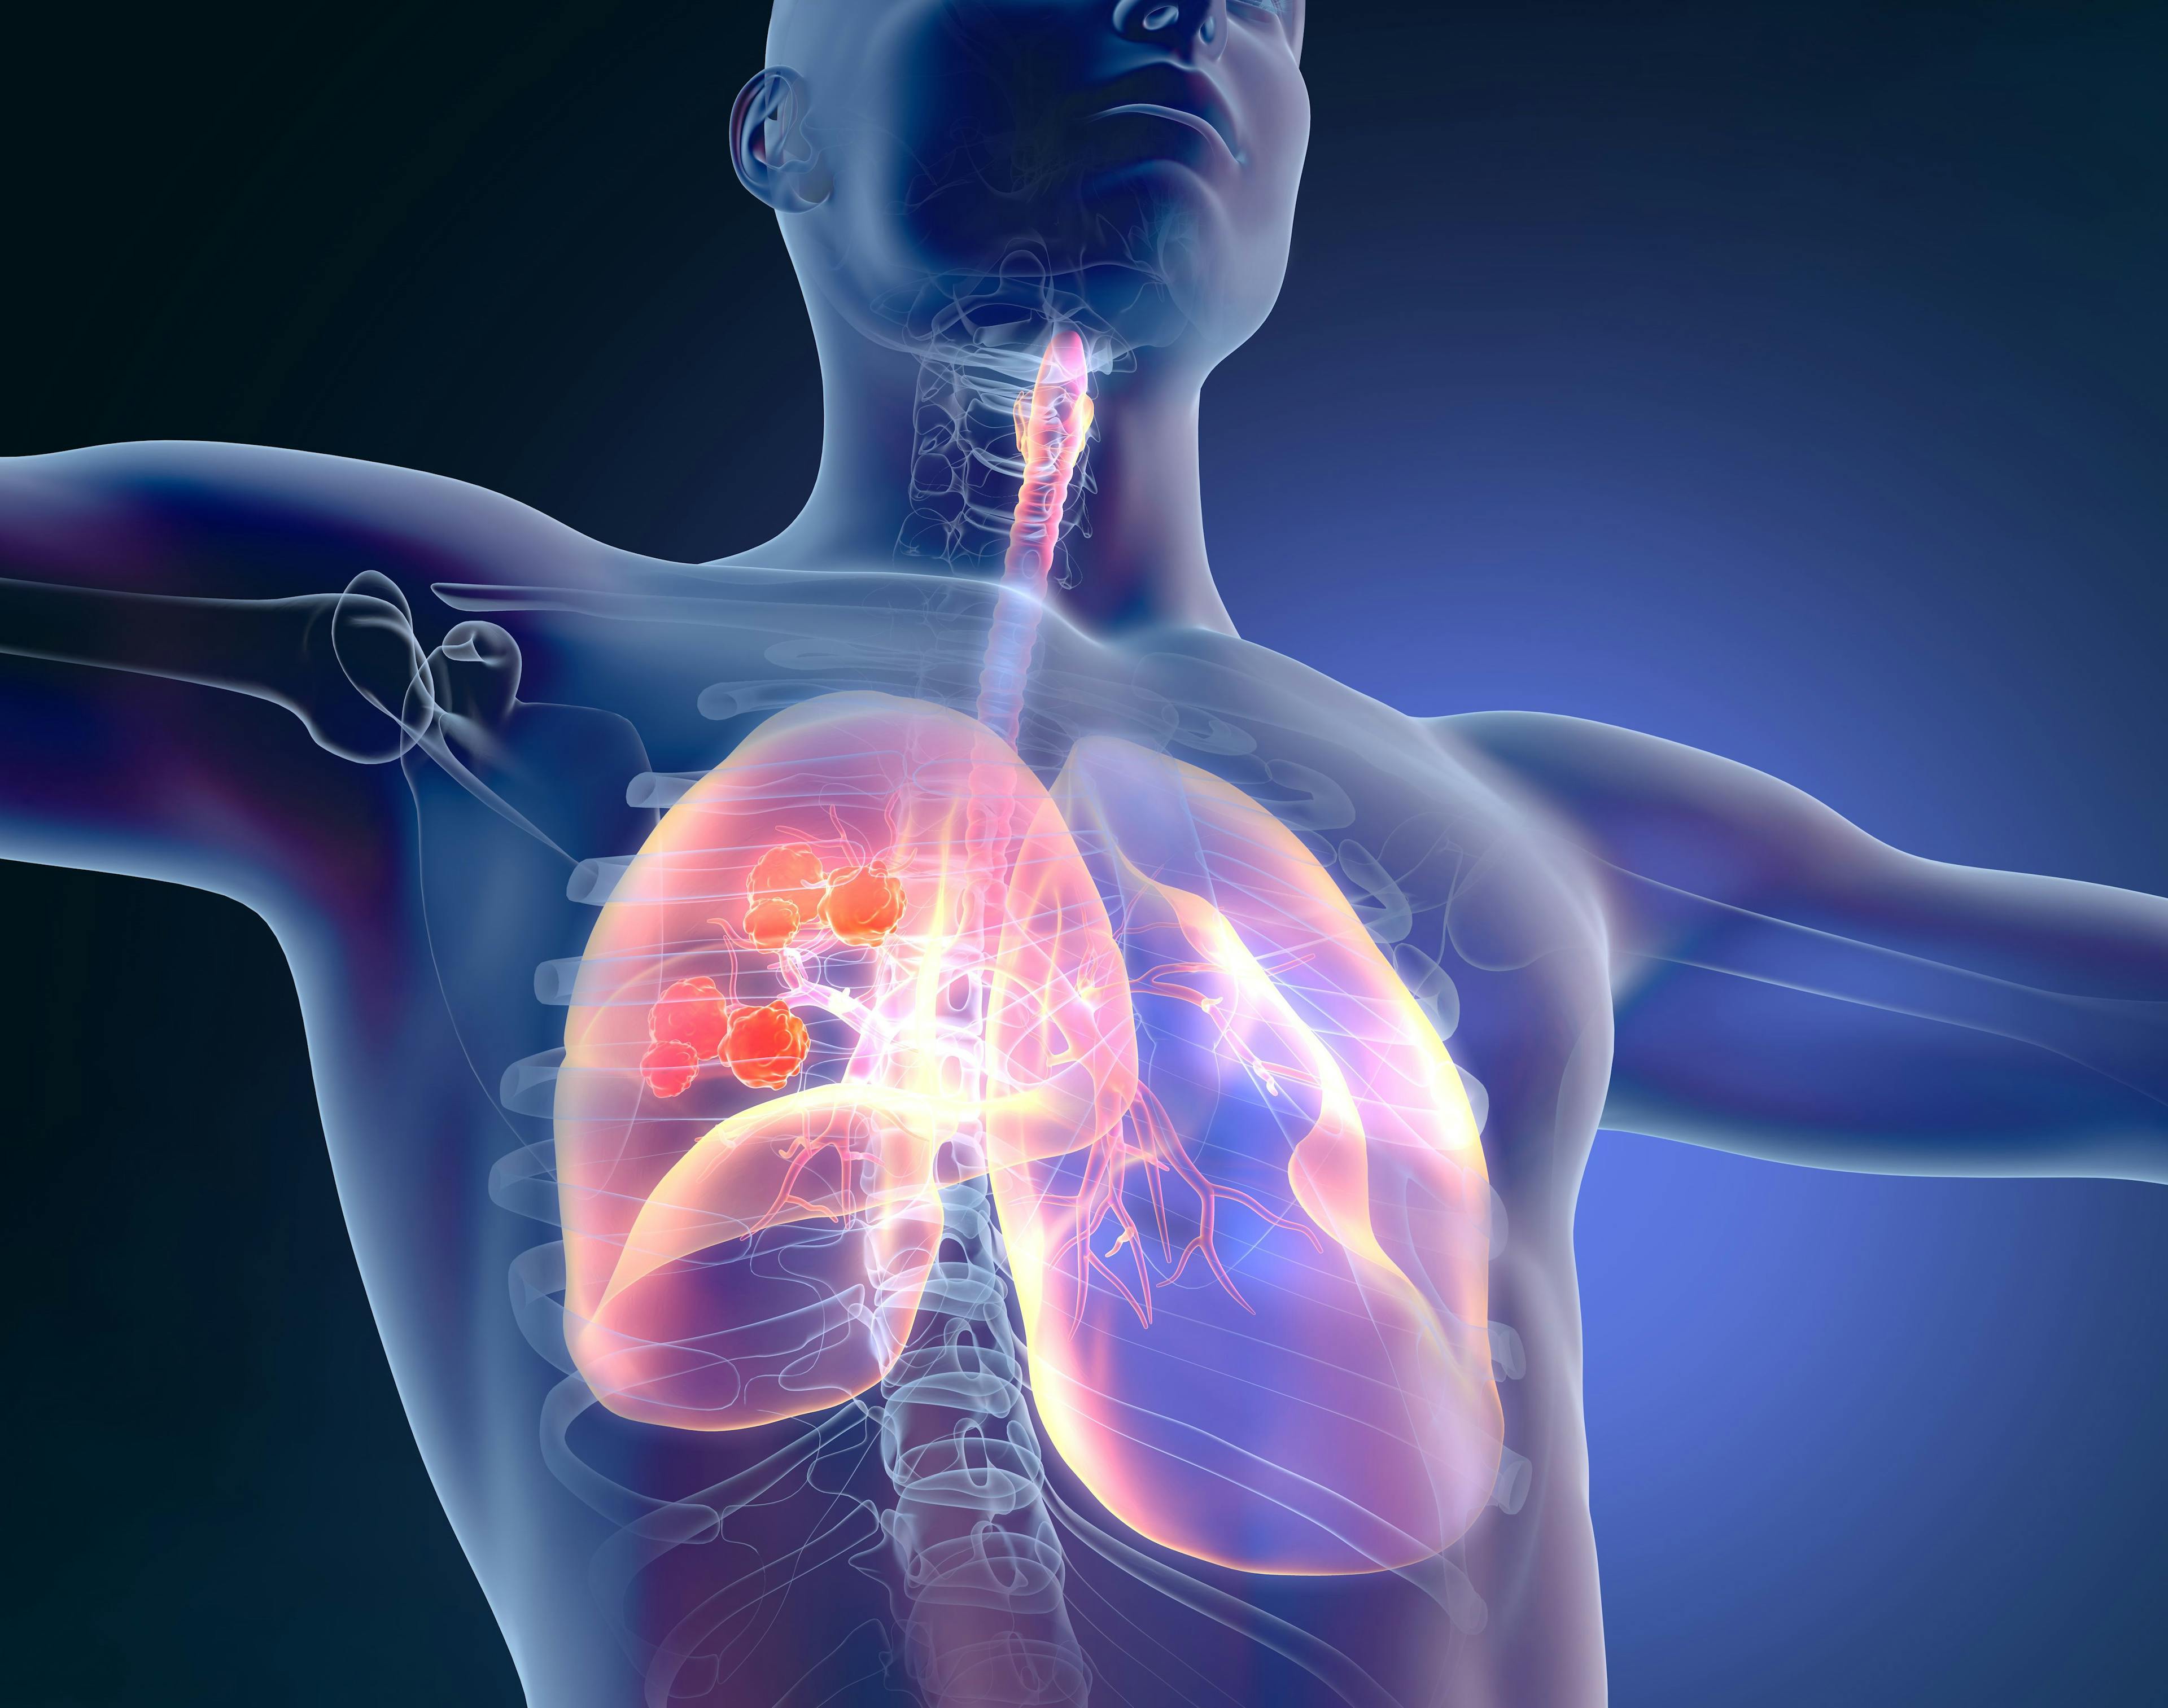 Findings from the phase 3 CheckMate 743 trial indicated that patients with unresectable malignant pleural mesothelioma derived a continued overall survival benefit after being treated with nivolumab and ipilimumab.